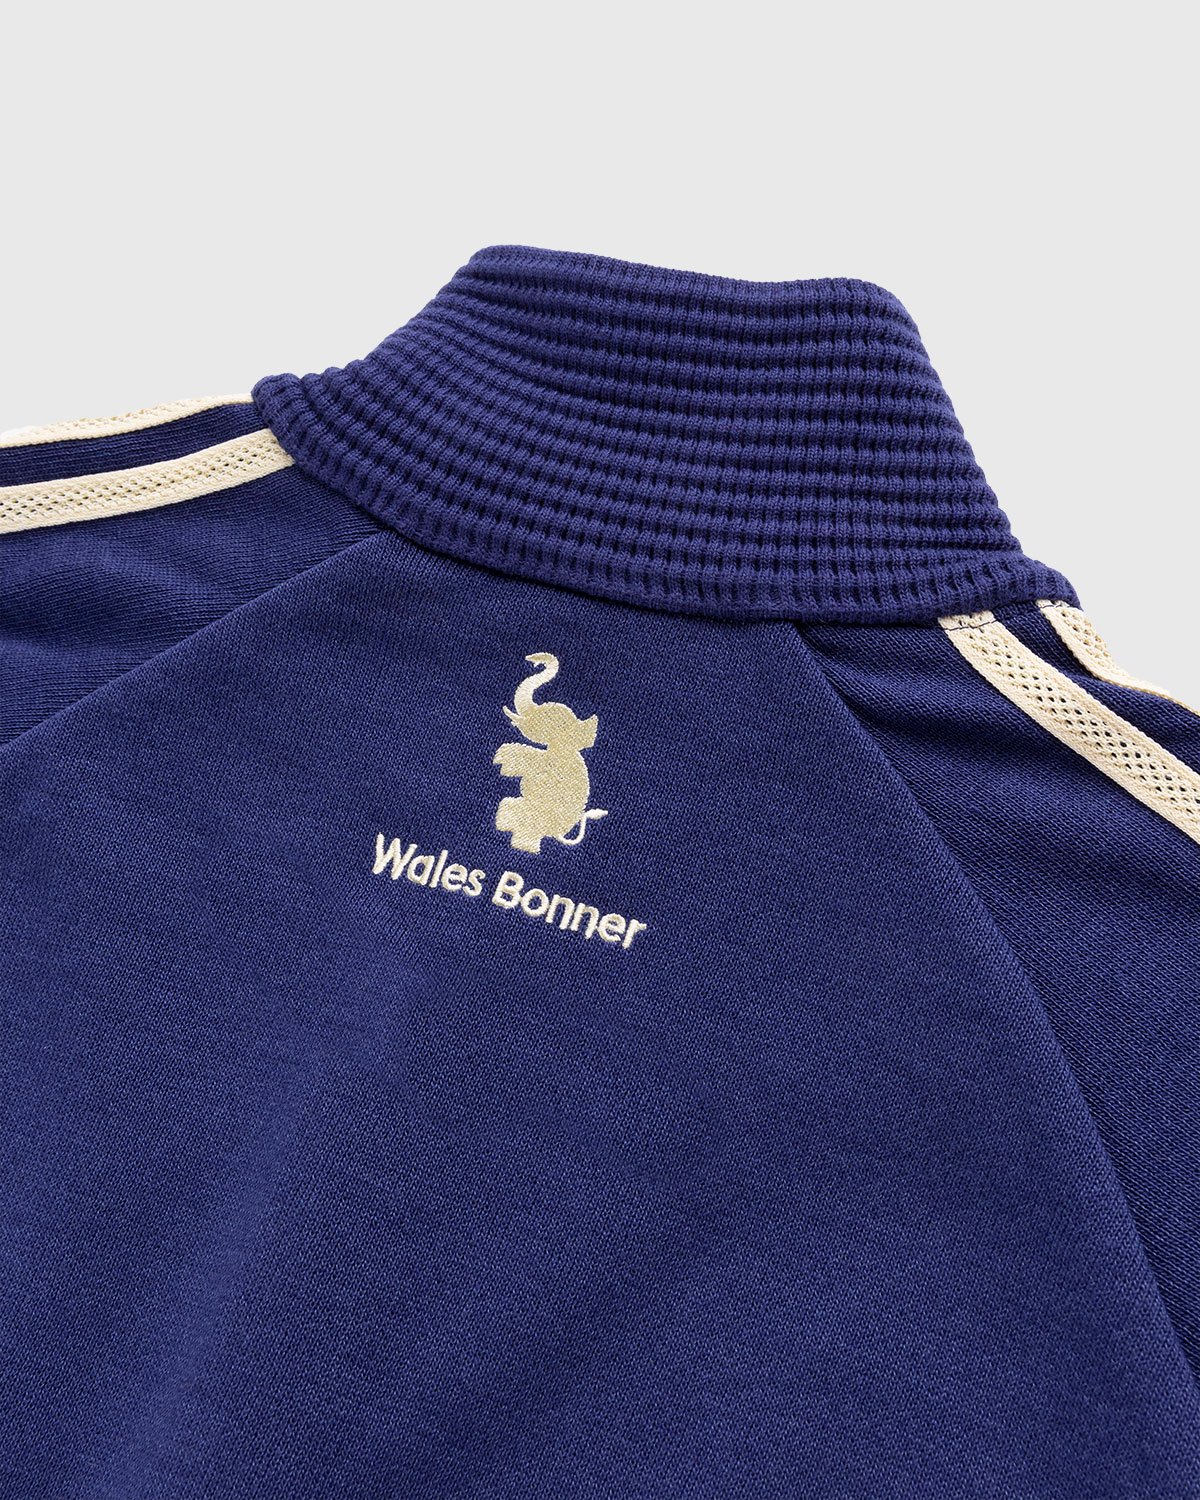 Adidas x Wales Bonner - 80s Track Top Night Sky - Clothing - Blue - Image 7